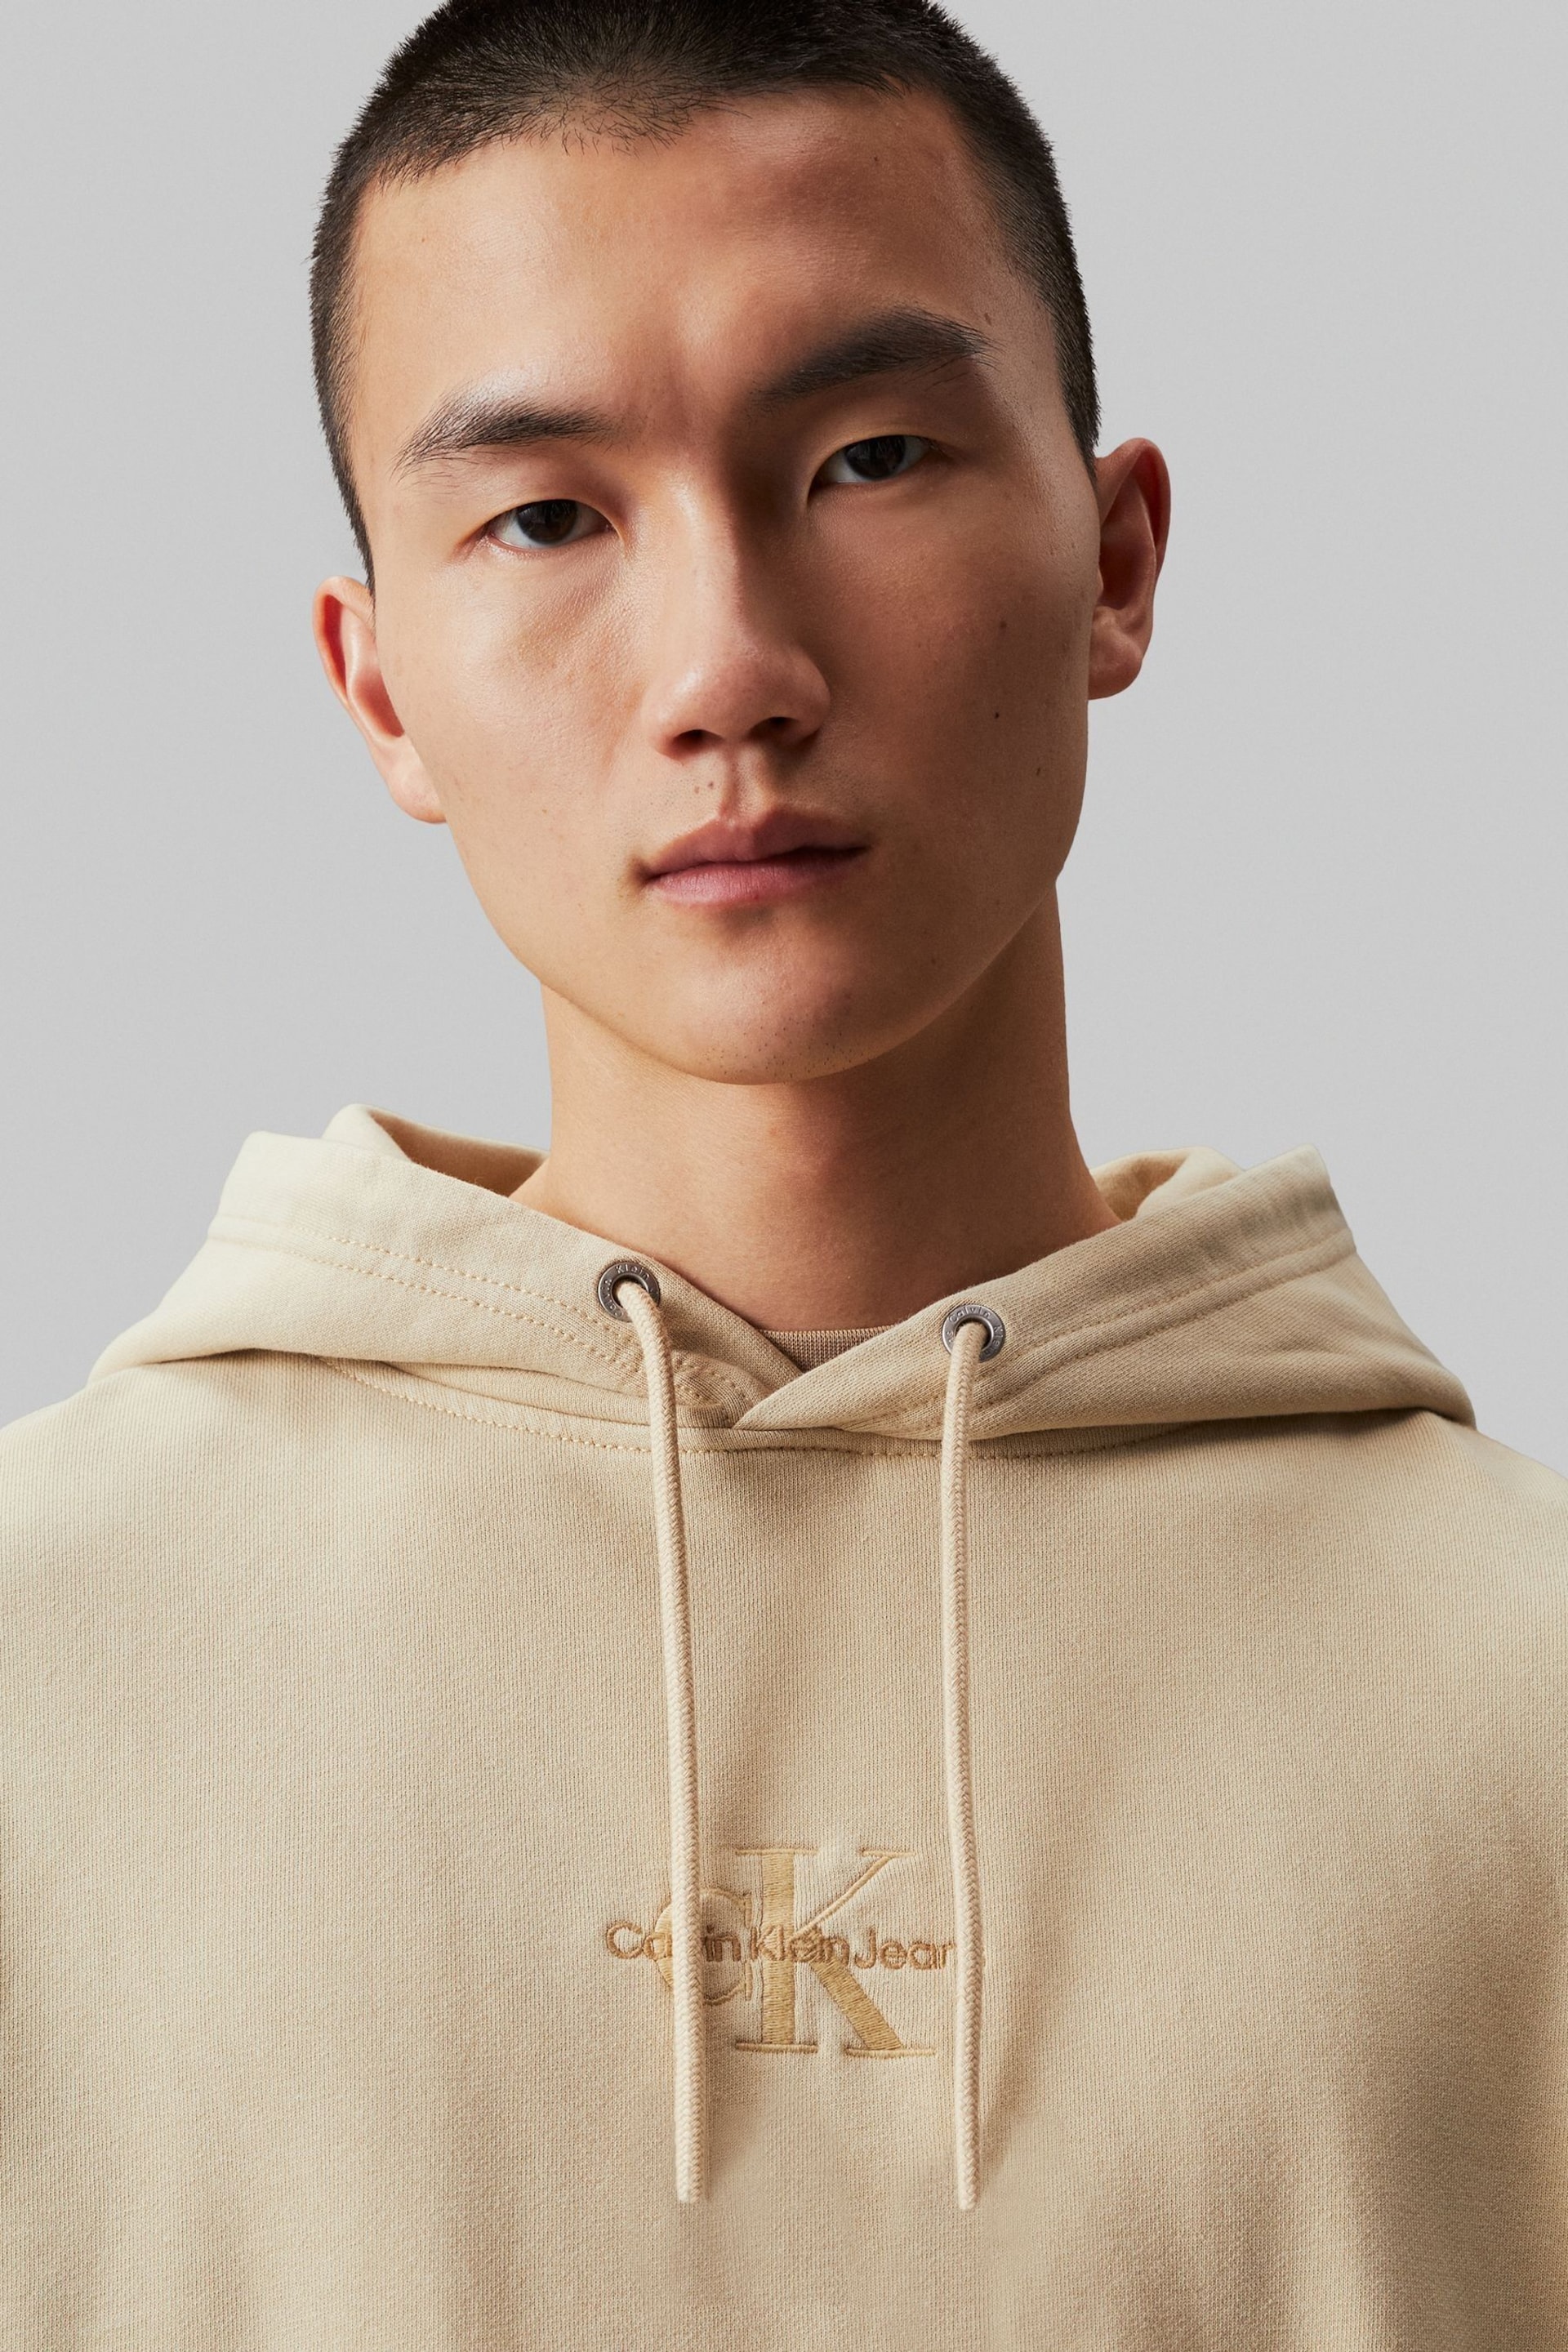 Calvin Klein Jeans Cream Washed Monologo Hoodie - Image 2 of 5